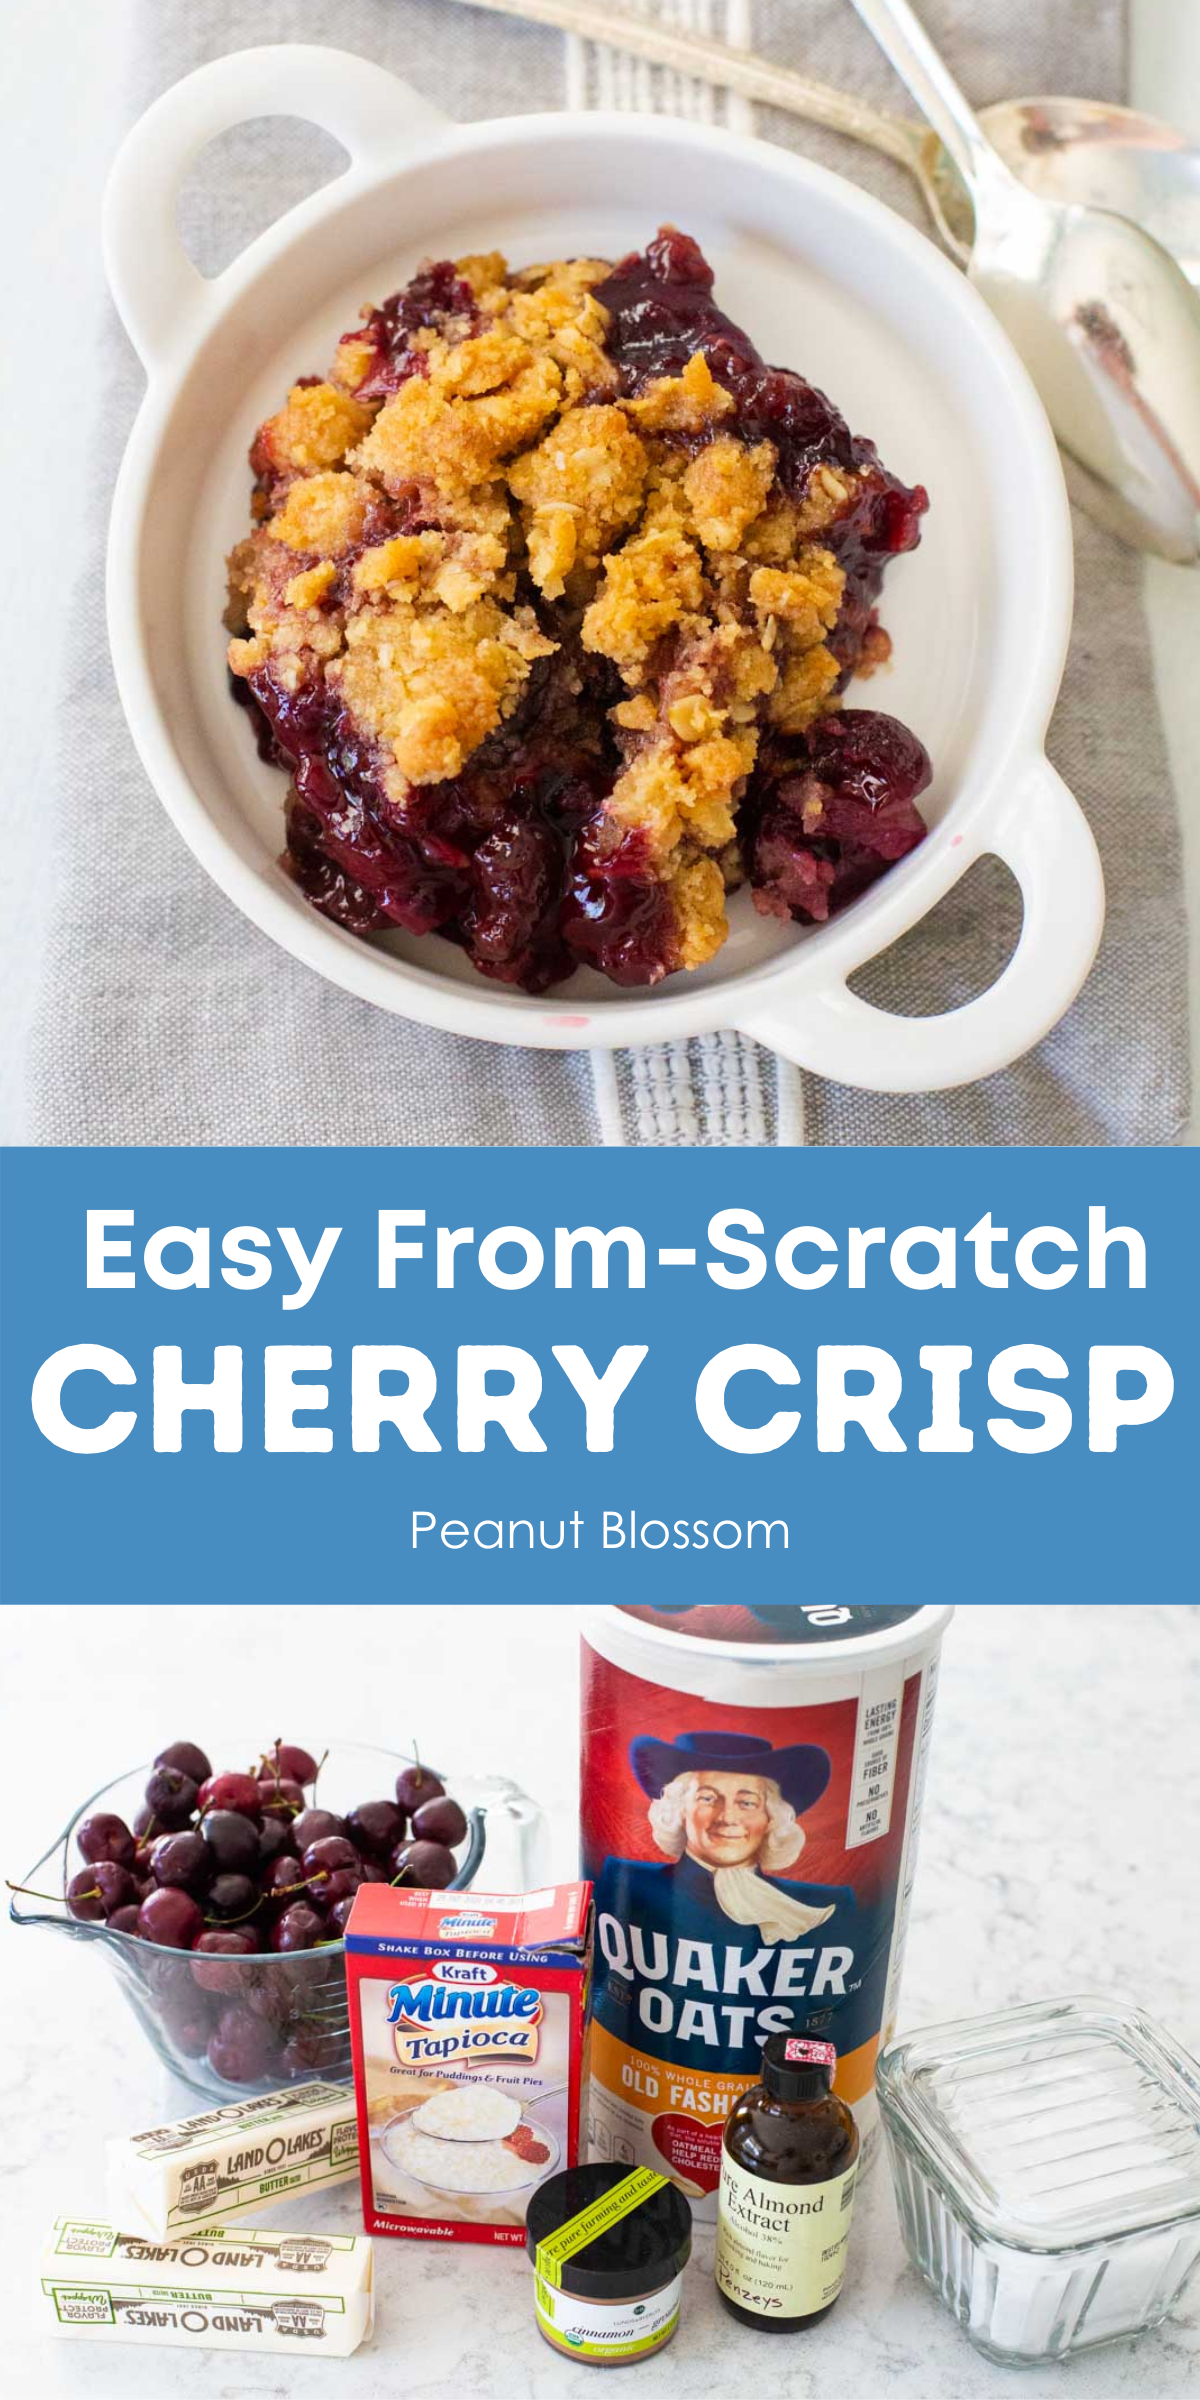 A graphic shows the finished cherry crisp on top and the ingredients needed below.